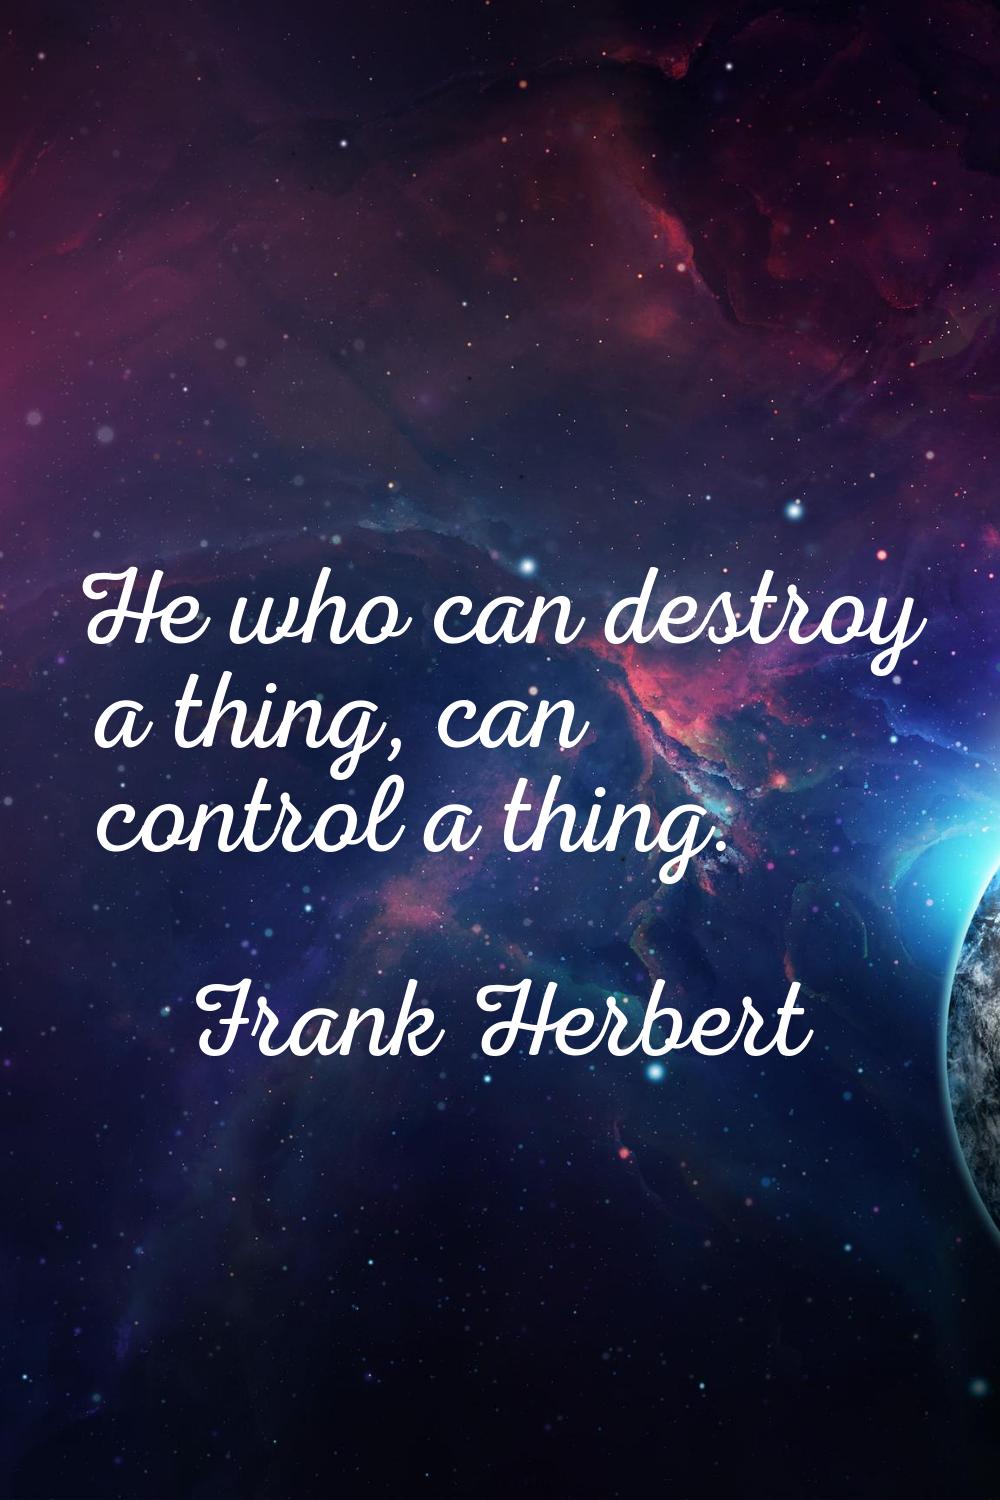 He who can destroy a thing, can control a thing.